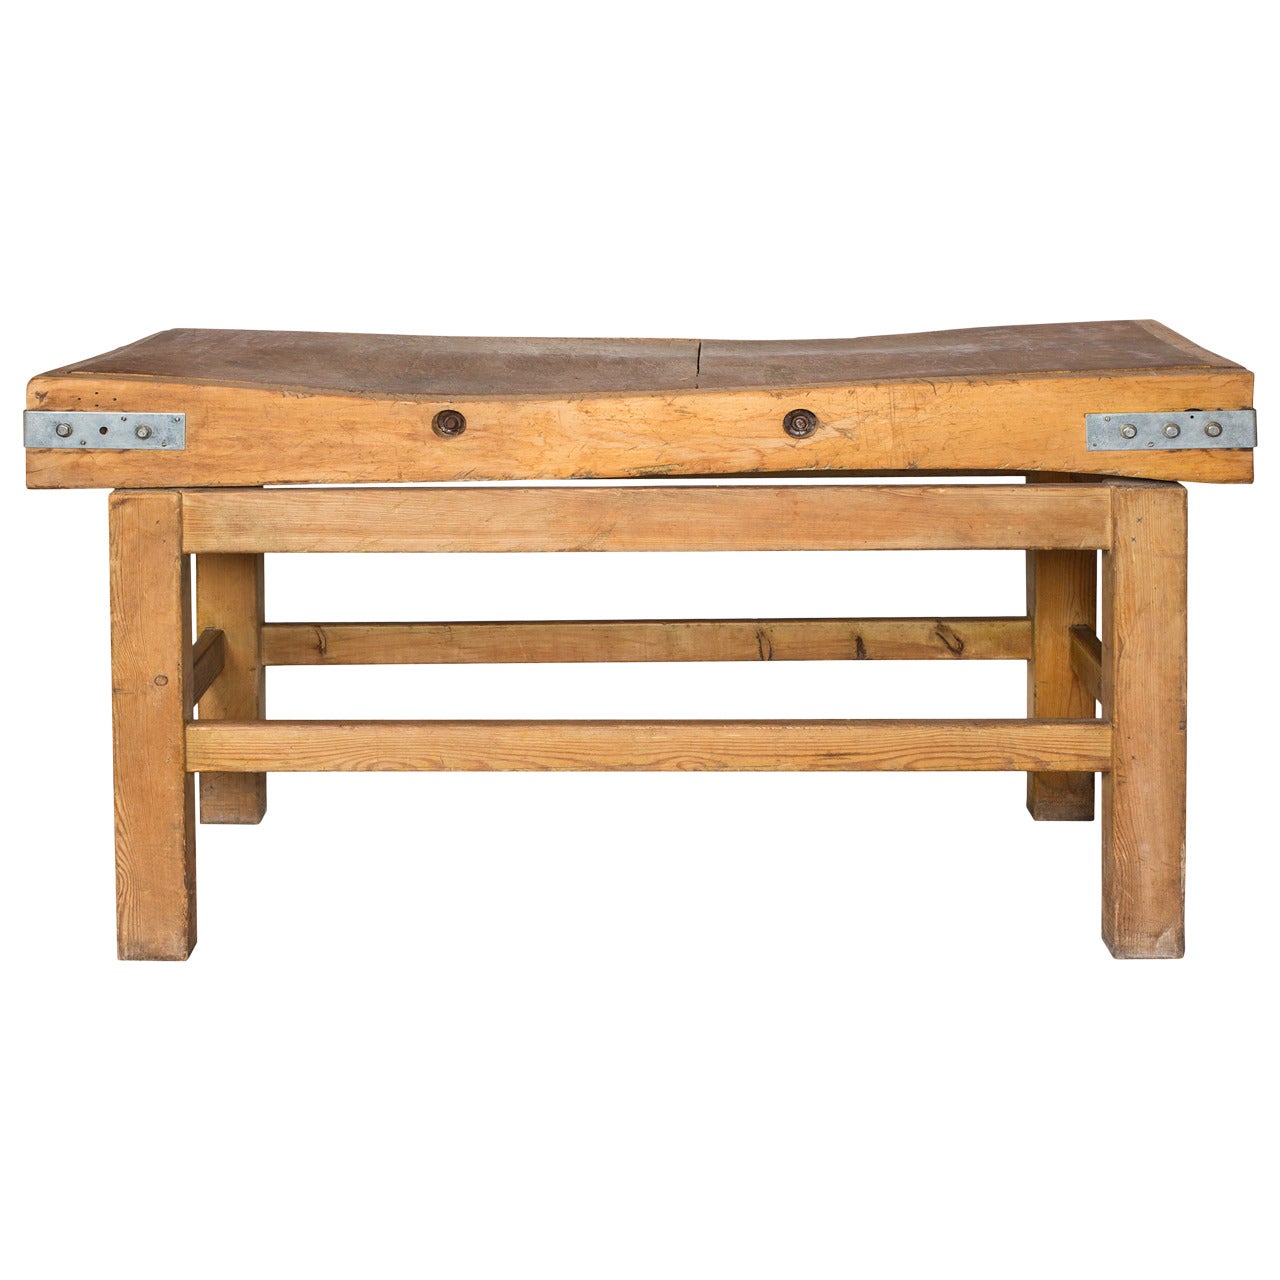 English Butcher Block Table Stand